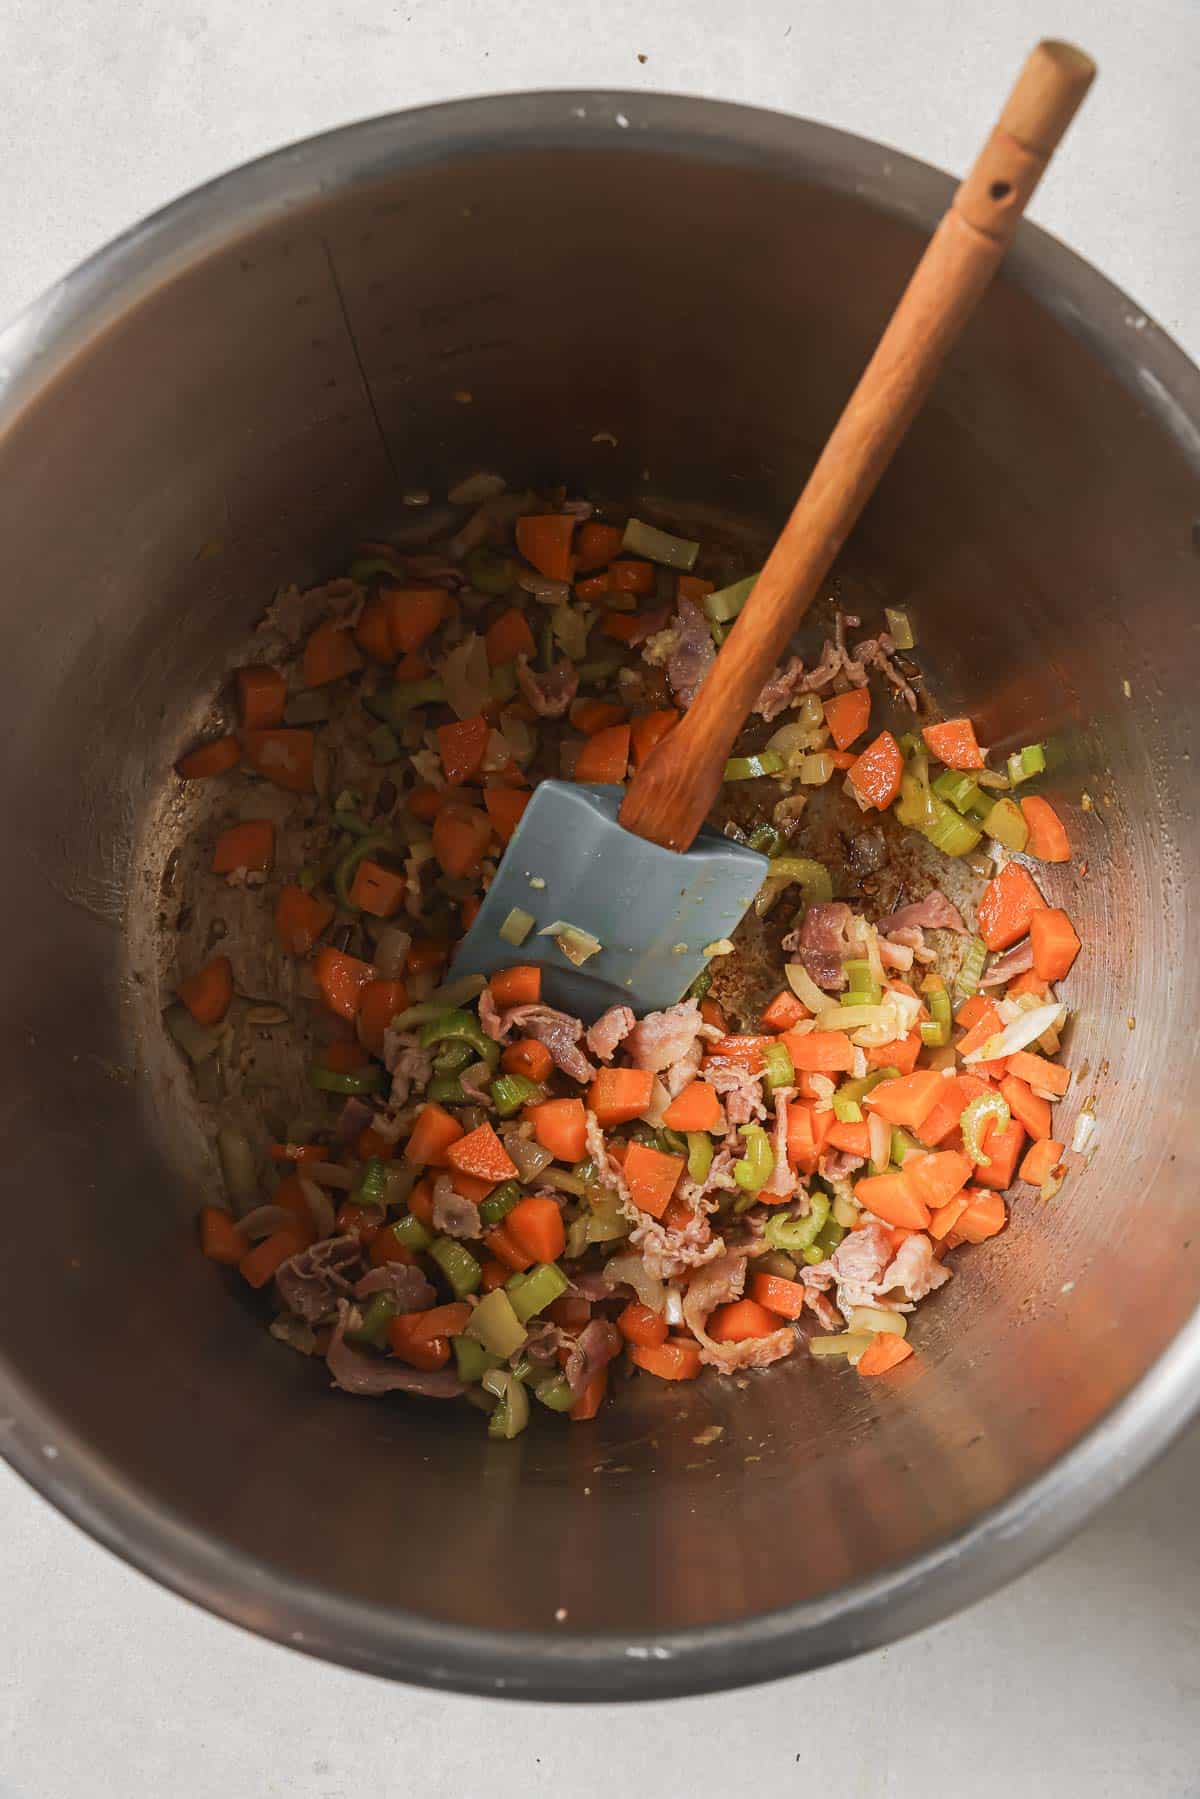 Chopped carrots, celery, and onion in a metal Instant pot with a wooden spatula.